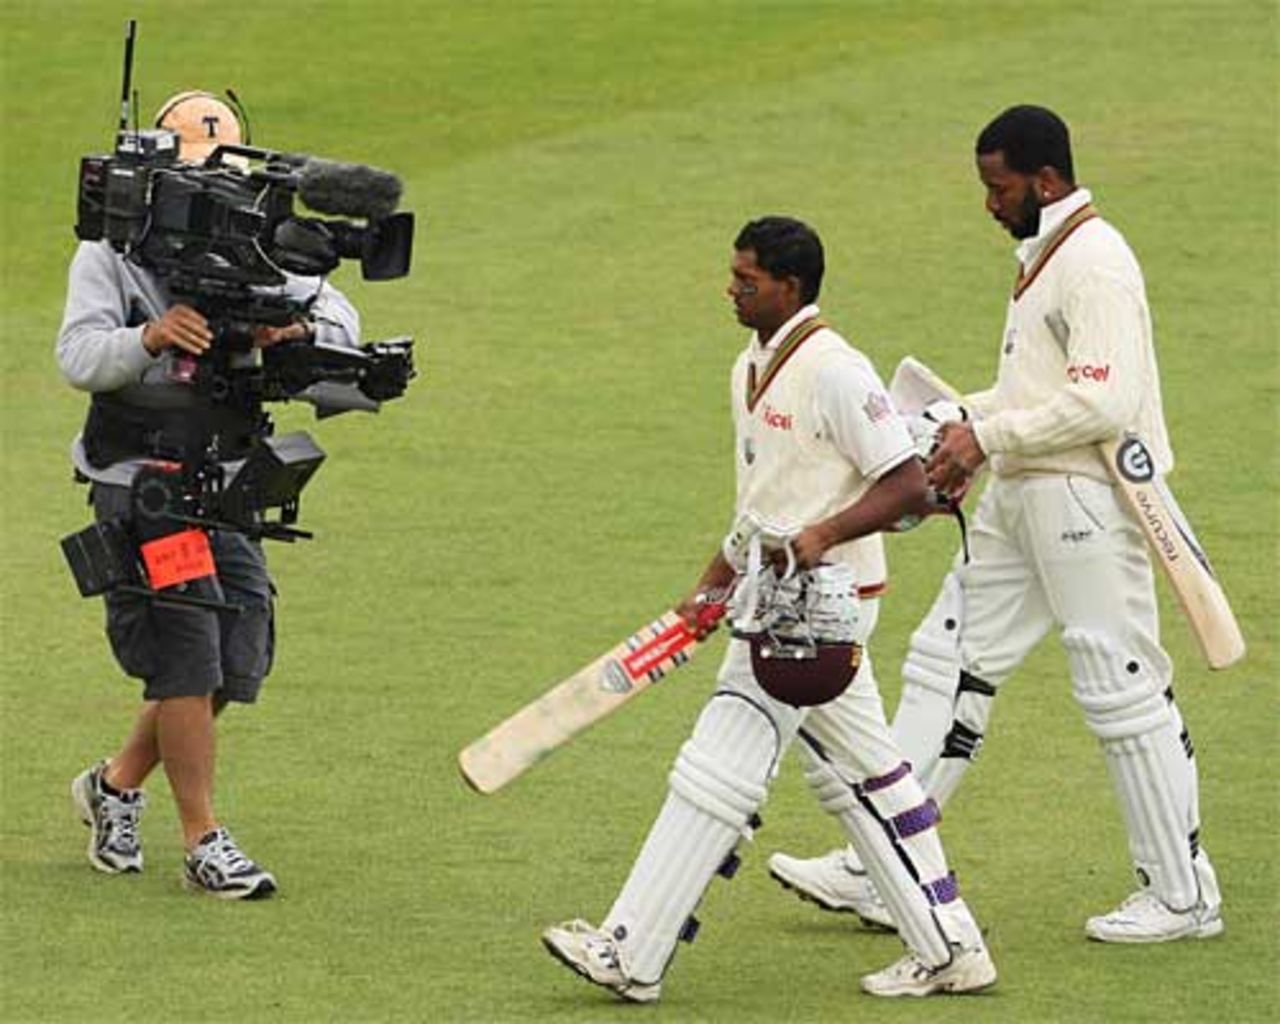 Job well done - Shiv Chanderpaul and Corey Collymore kept their focus in their last-wicket stand of 58, England v West Indies, 4th Test, Chester-le-Street, June 17, 2007